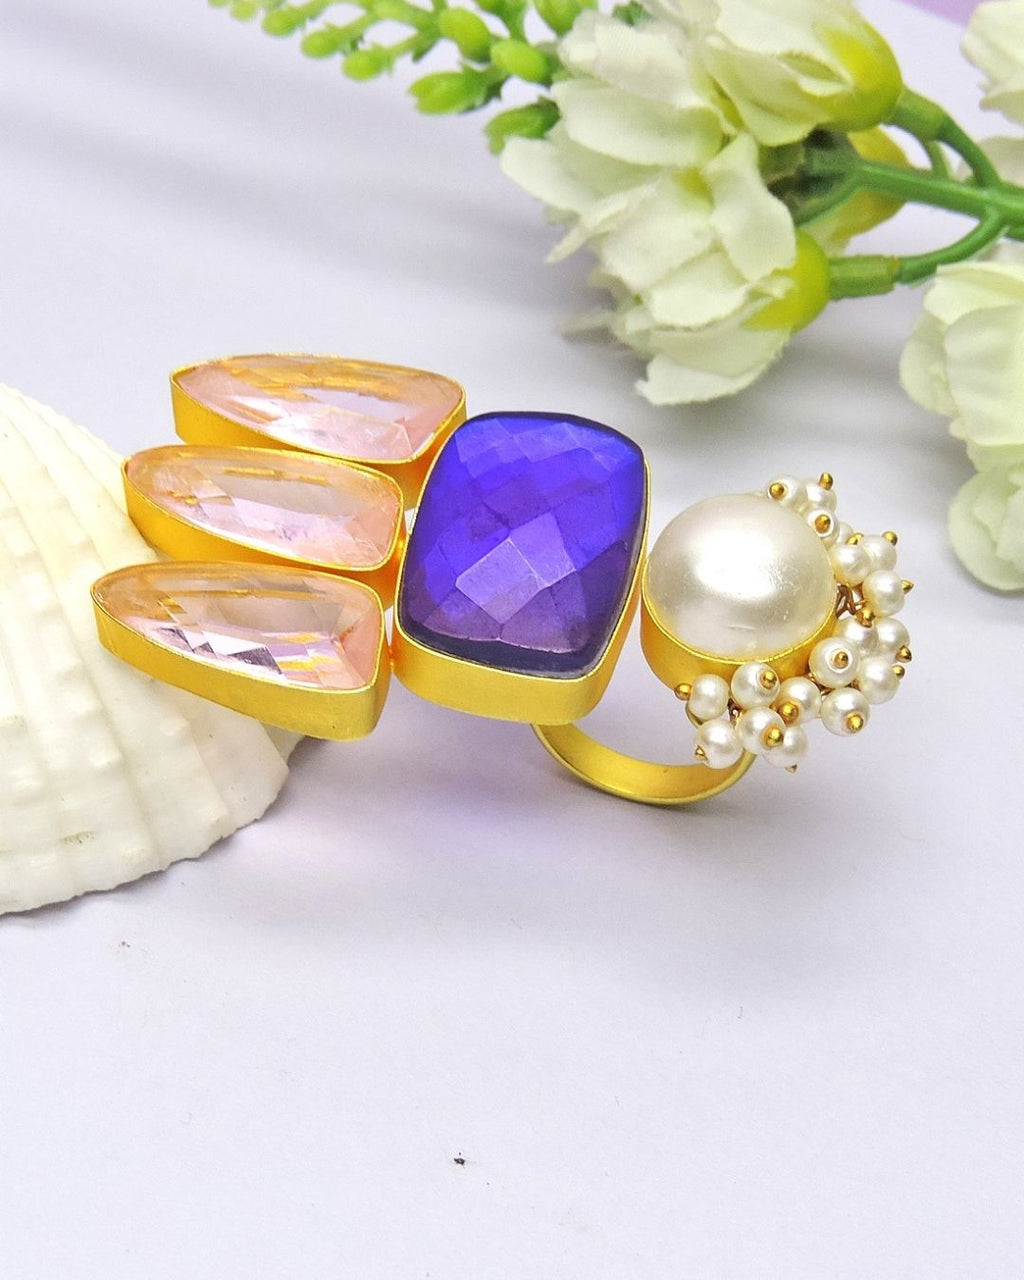 Francesca Ring - Rings - Handcrafted Jewellery - Made in India - Dubai Jewellery, Fashion & Lifestyle - Dori